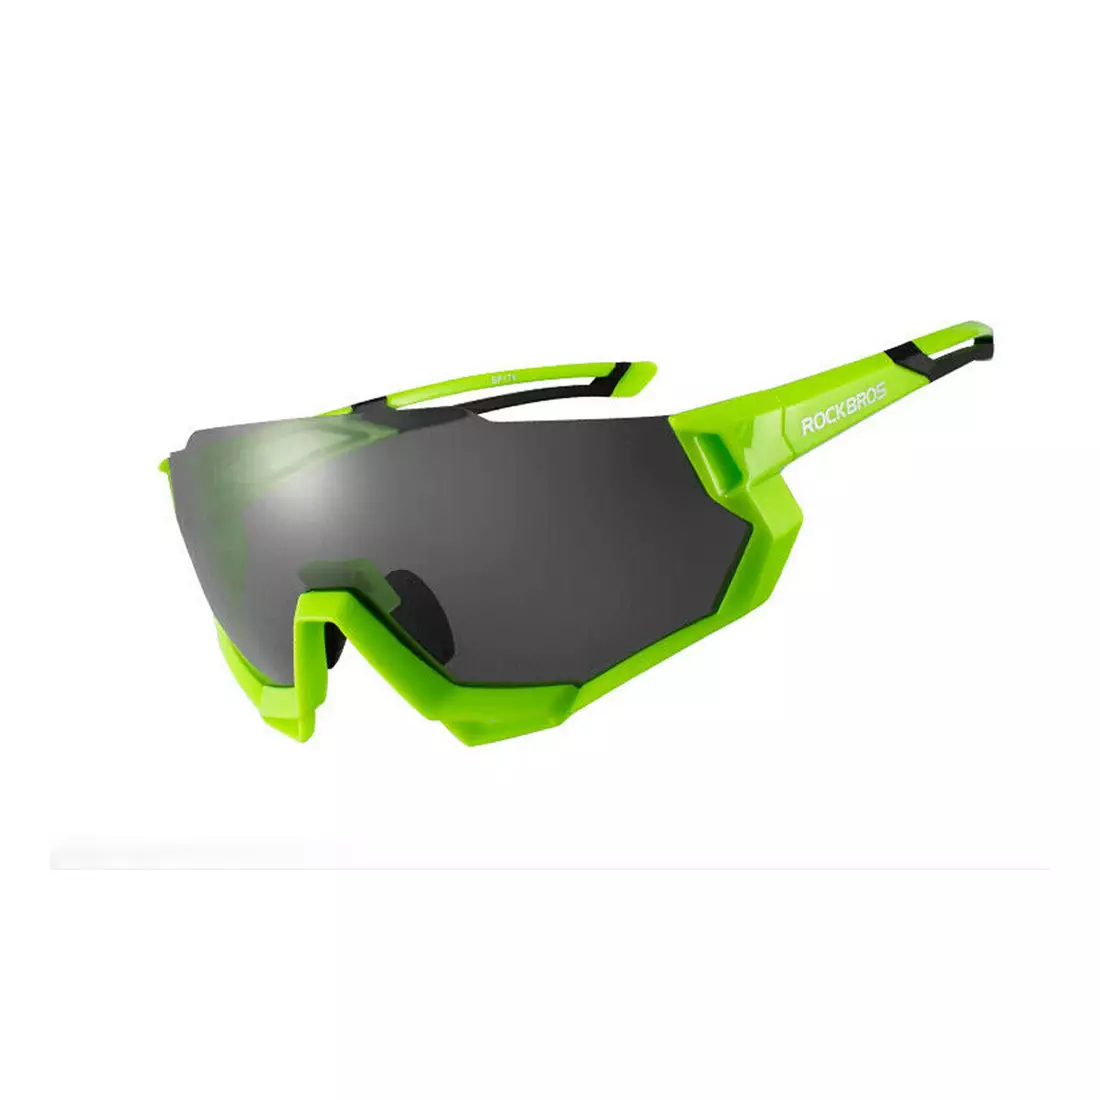 Rockbros 10133 bicycle/sports glasses with polarized 5 interchangeable lenses green